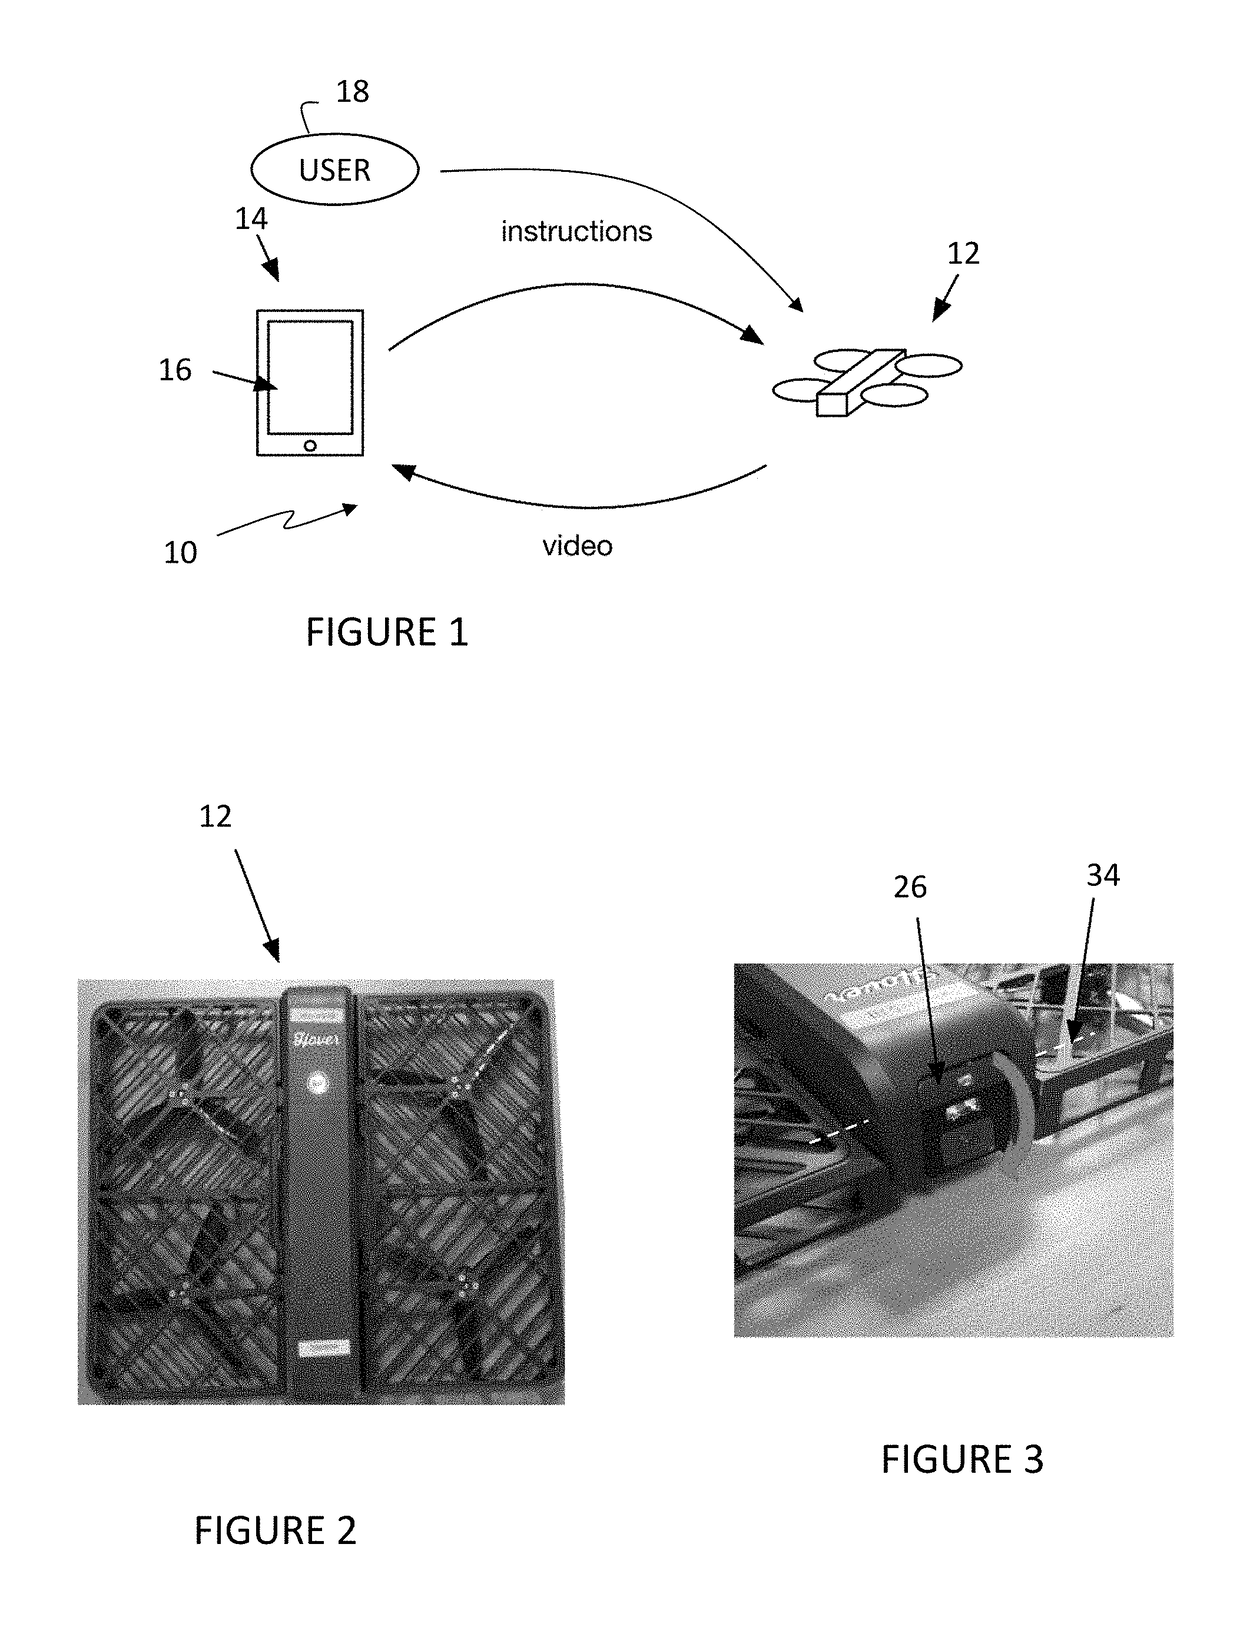 System and method for controller-free user drone interaction